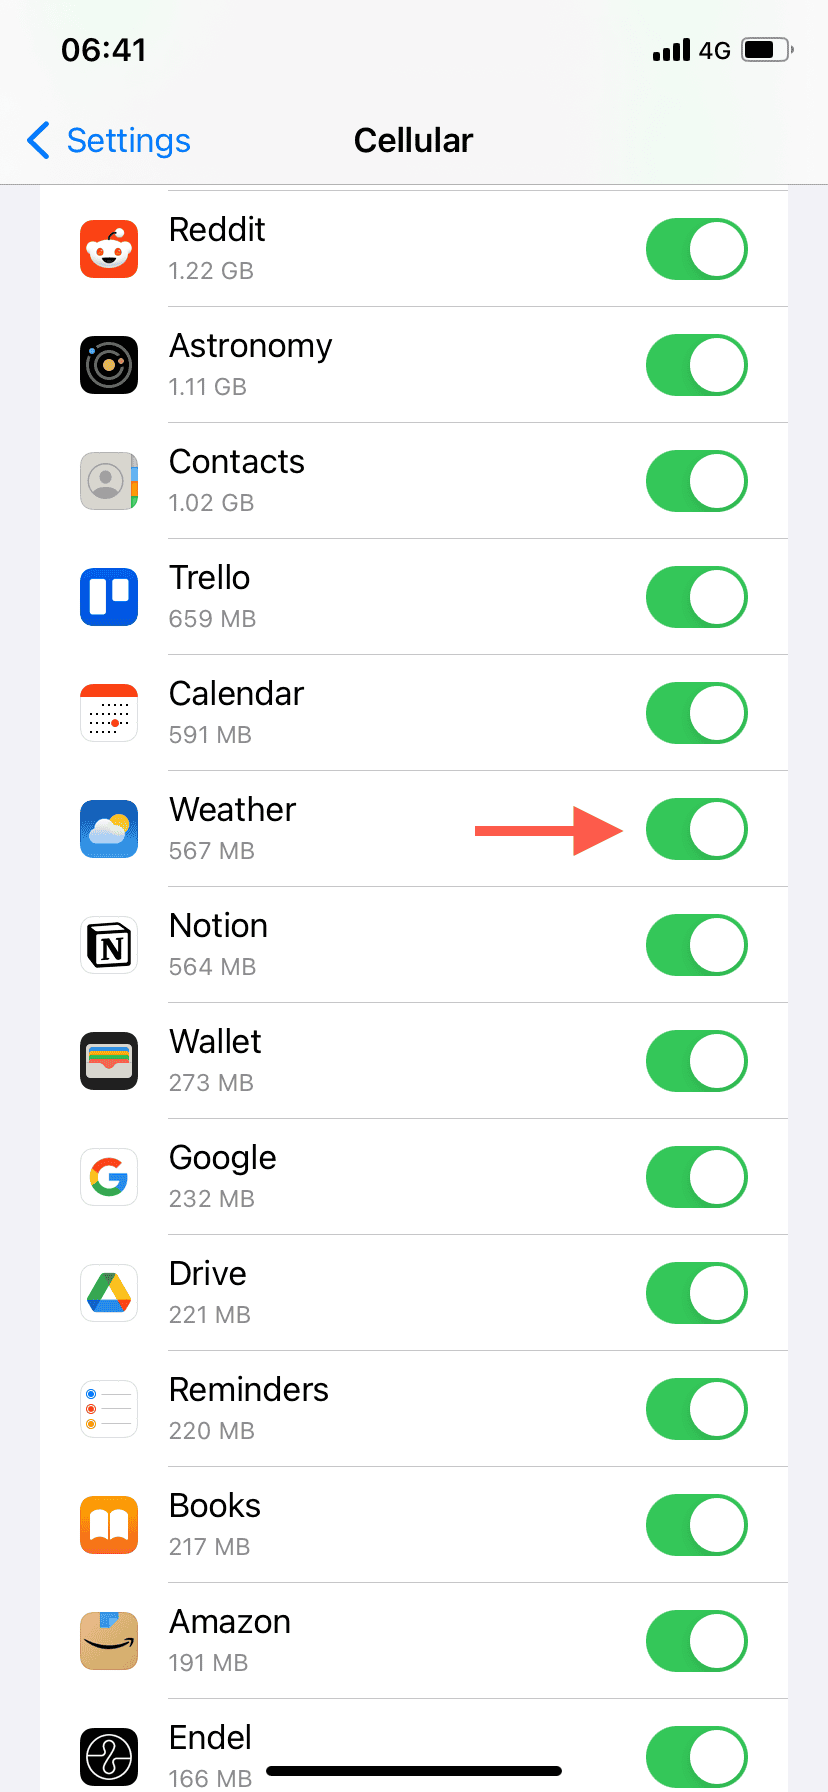 The Weather toggle activated in the Cellular screen on iPhone Settings.